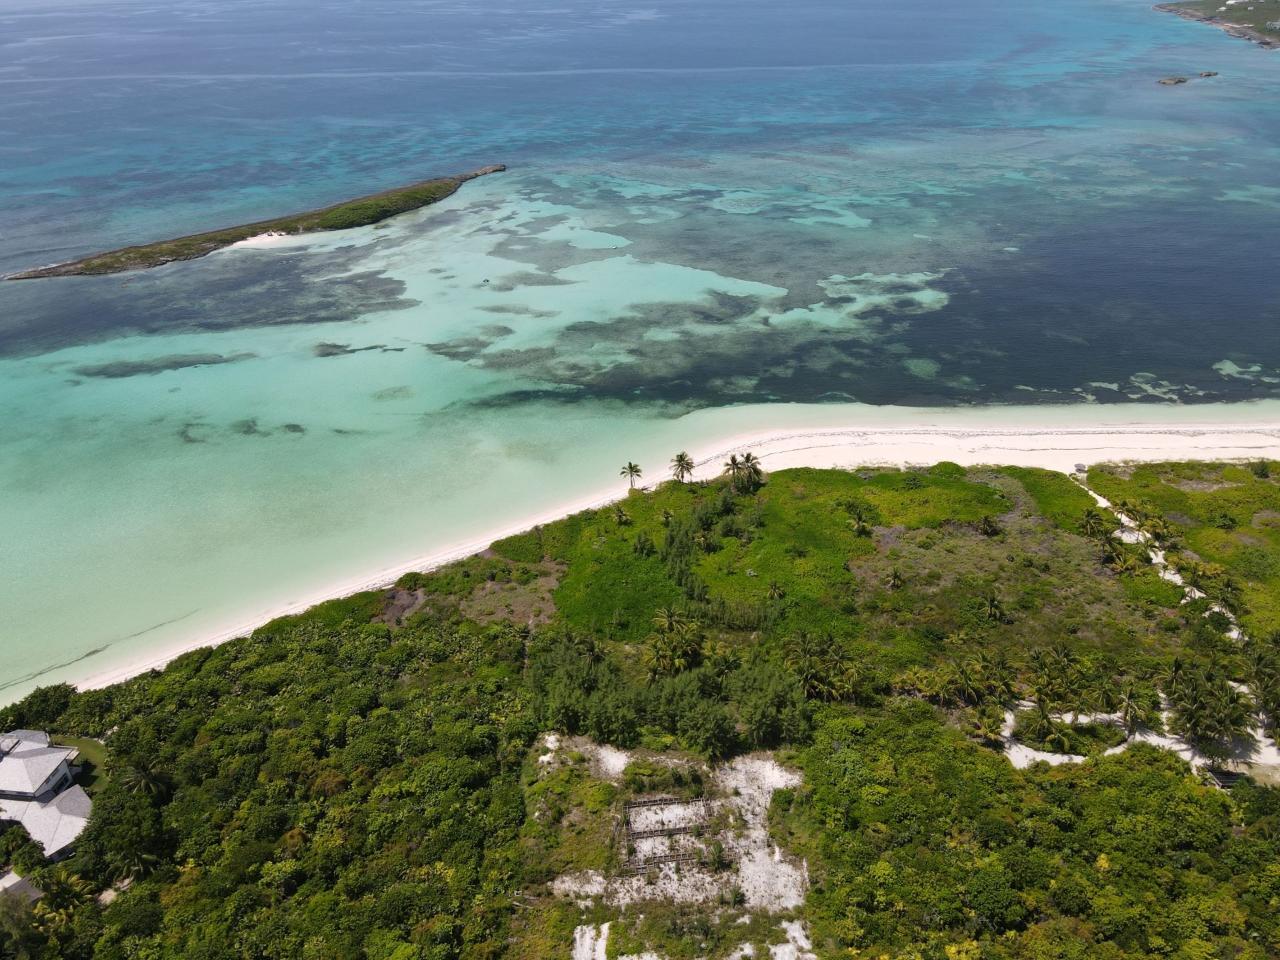 LOT 24 THE ABACO CLUB